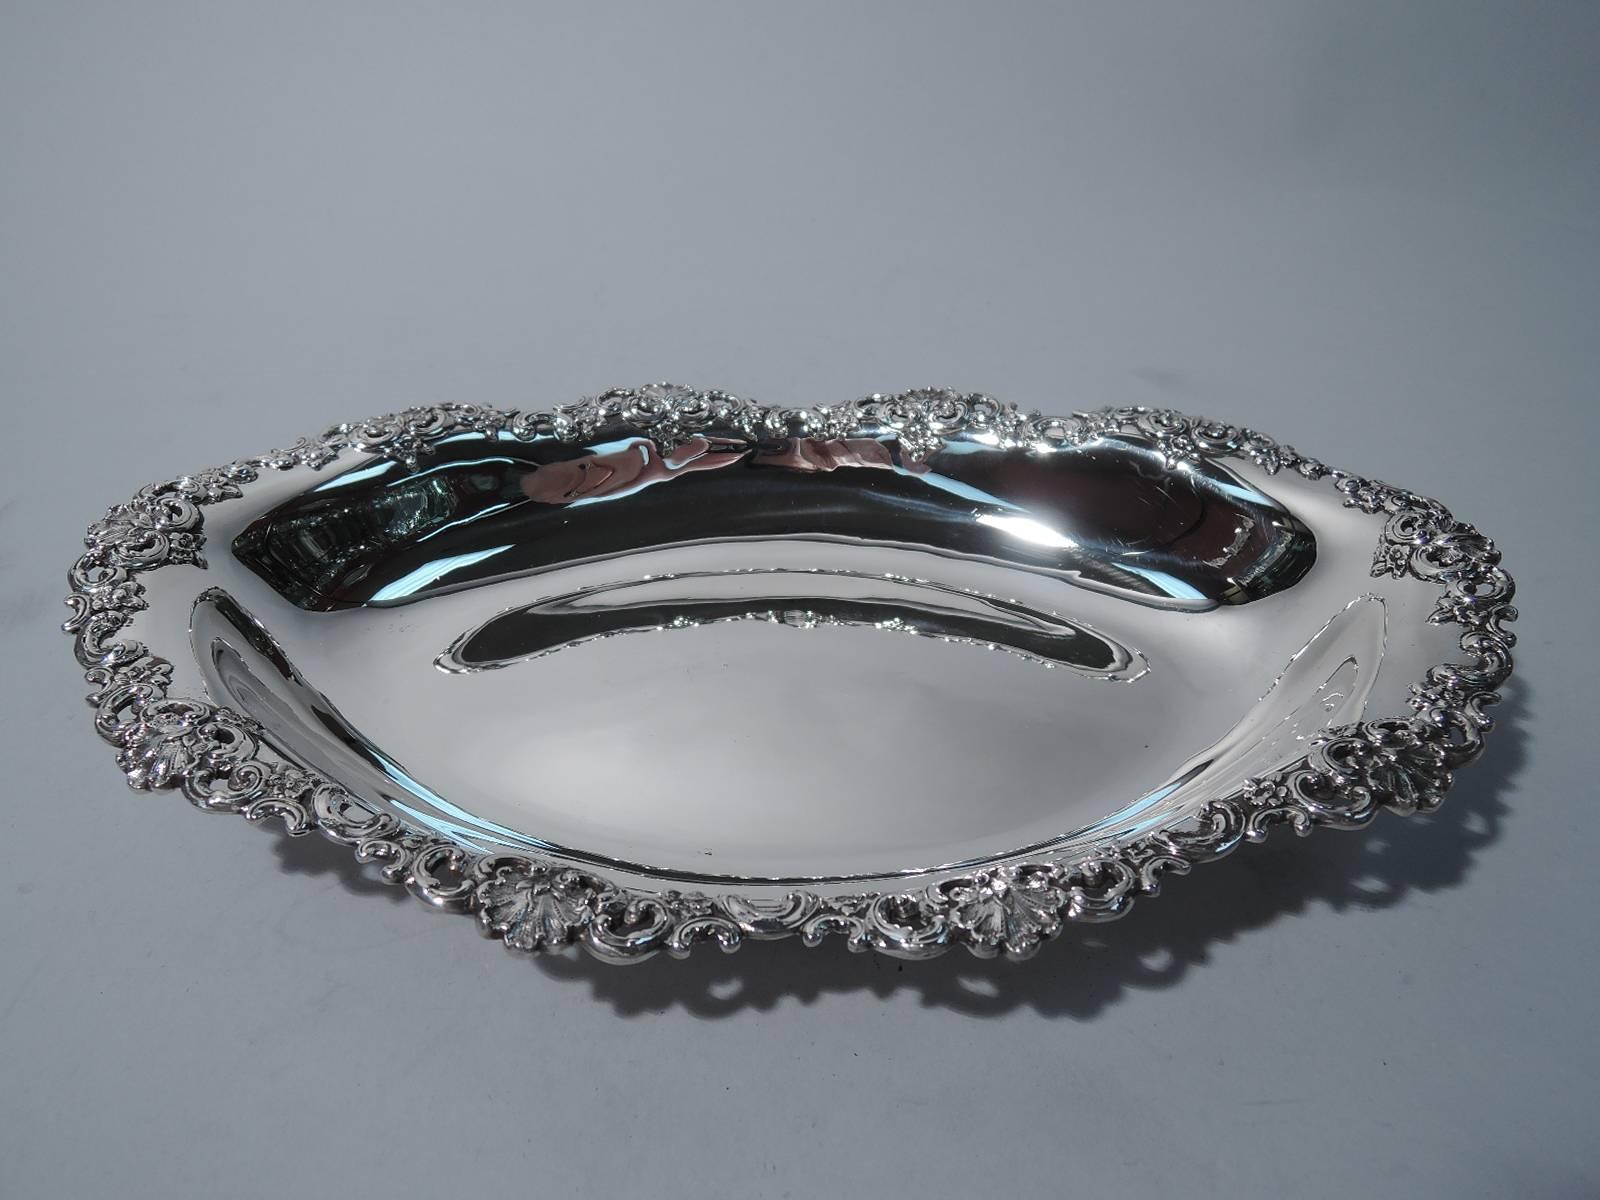 Sterling silver bread tray. Made by Tiffany & Co. in New York, circa 1895. Oval with tapering sides and pointed ends. Scallop shells and scrolls applied to rim. The pattern (no. 12344) was first produced in 1895. Hallmark includes director's letter